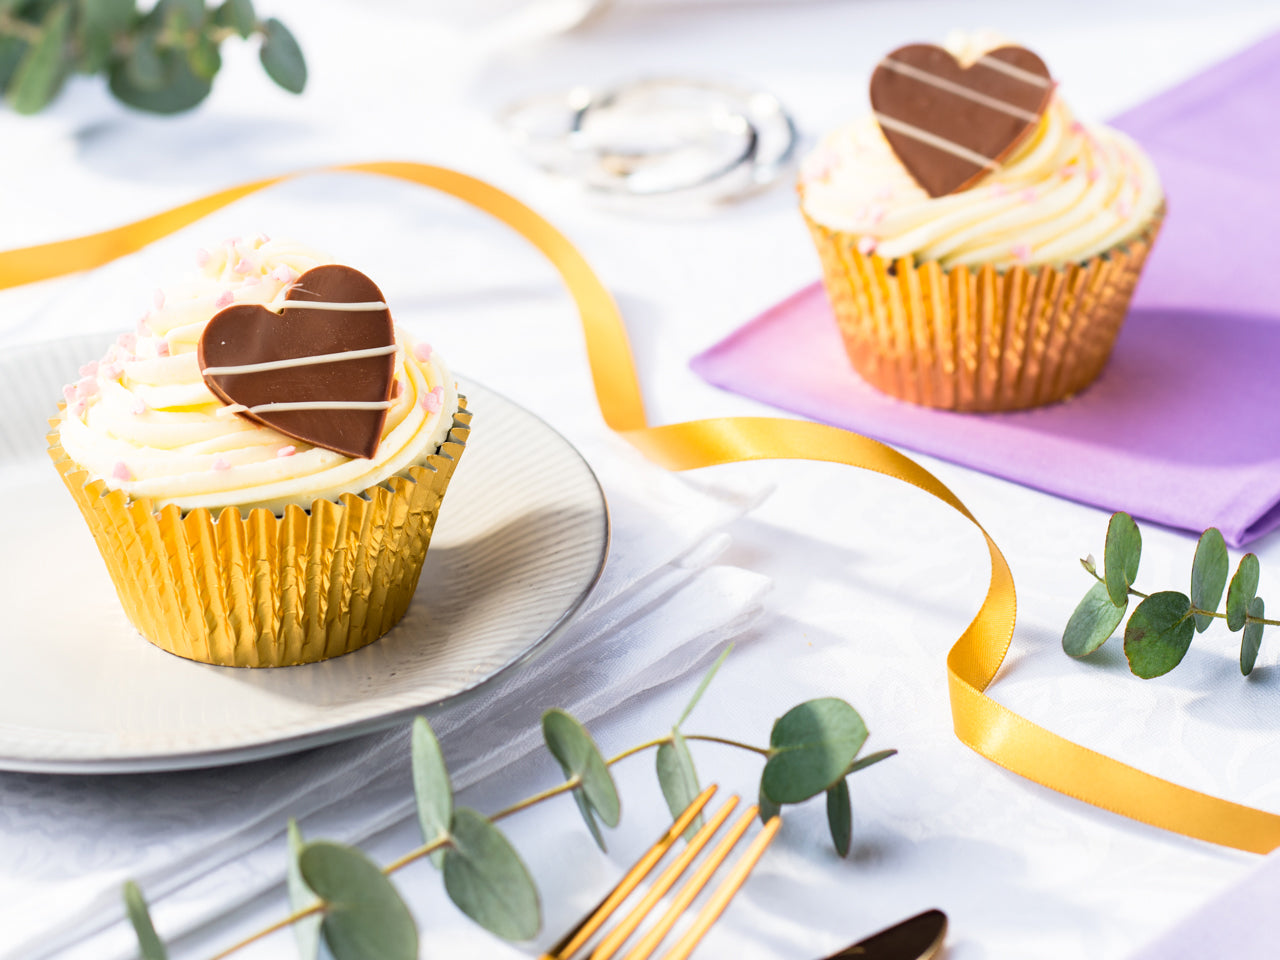 Two cupcakes with chocolate hearts in a gold foil case